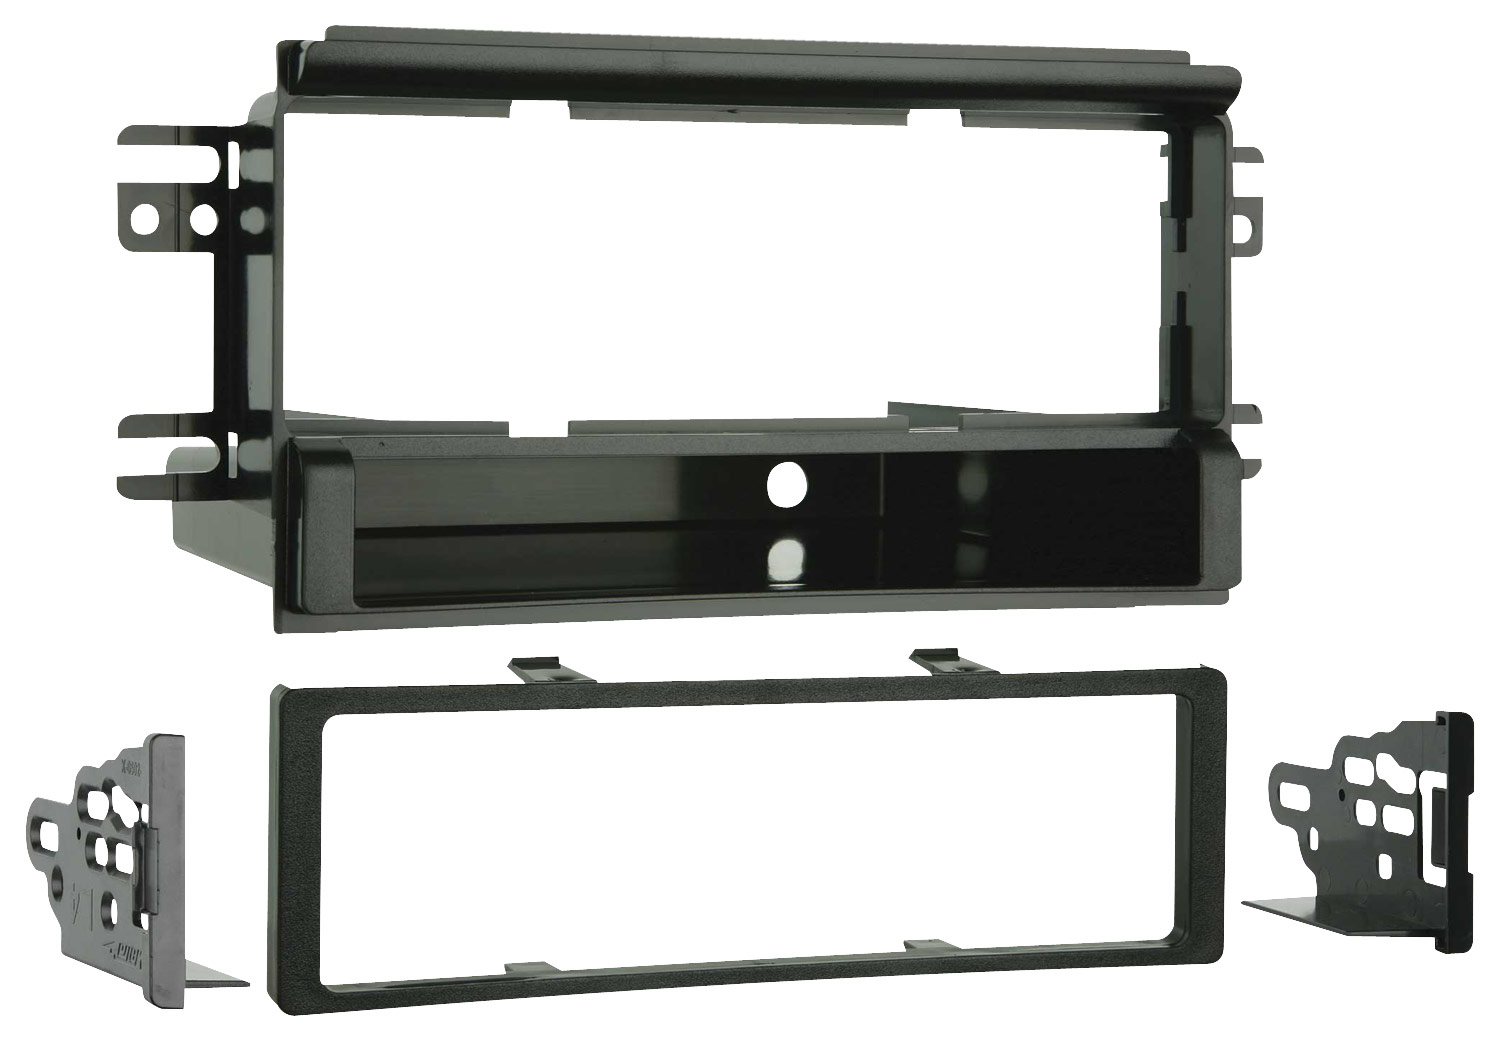 Metra - Dash Kit for Select 2004.5-2006 Kia Spectra EX or LX models - Black was $16.99 now $12.74 (25.0% off)